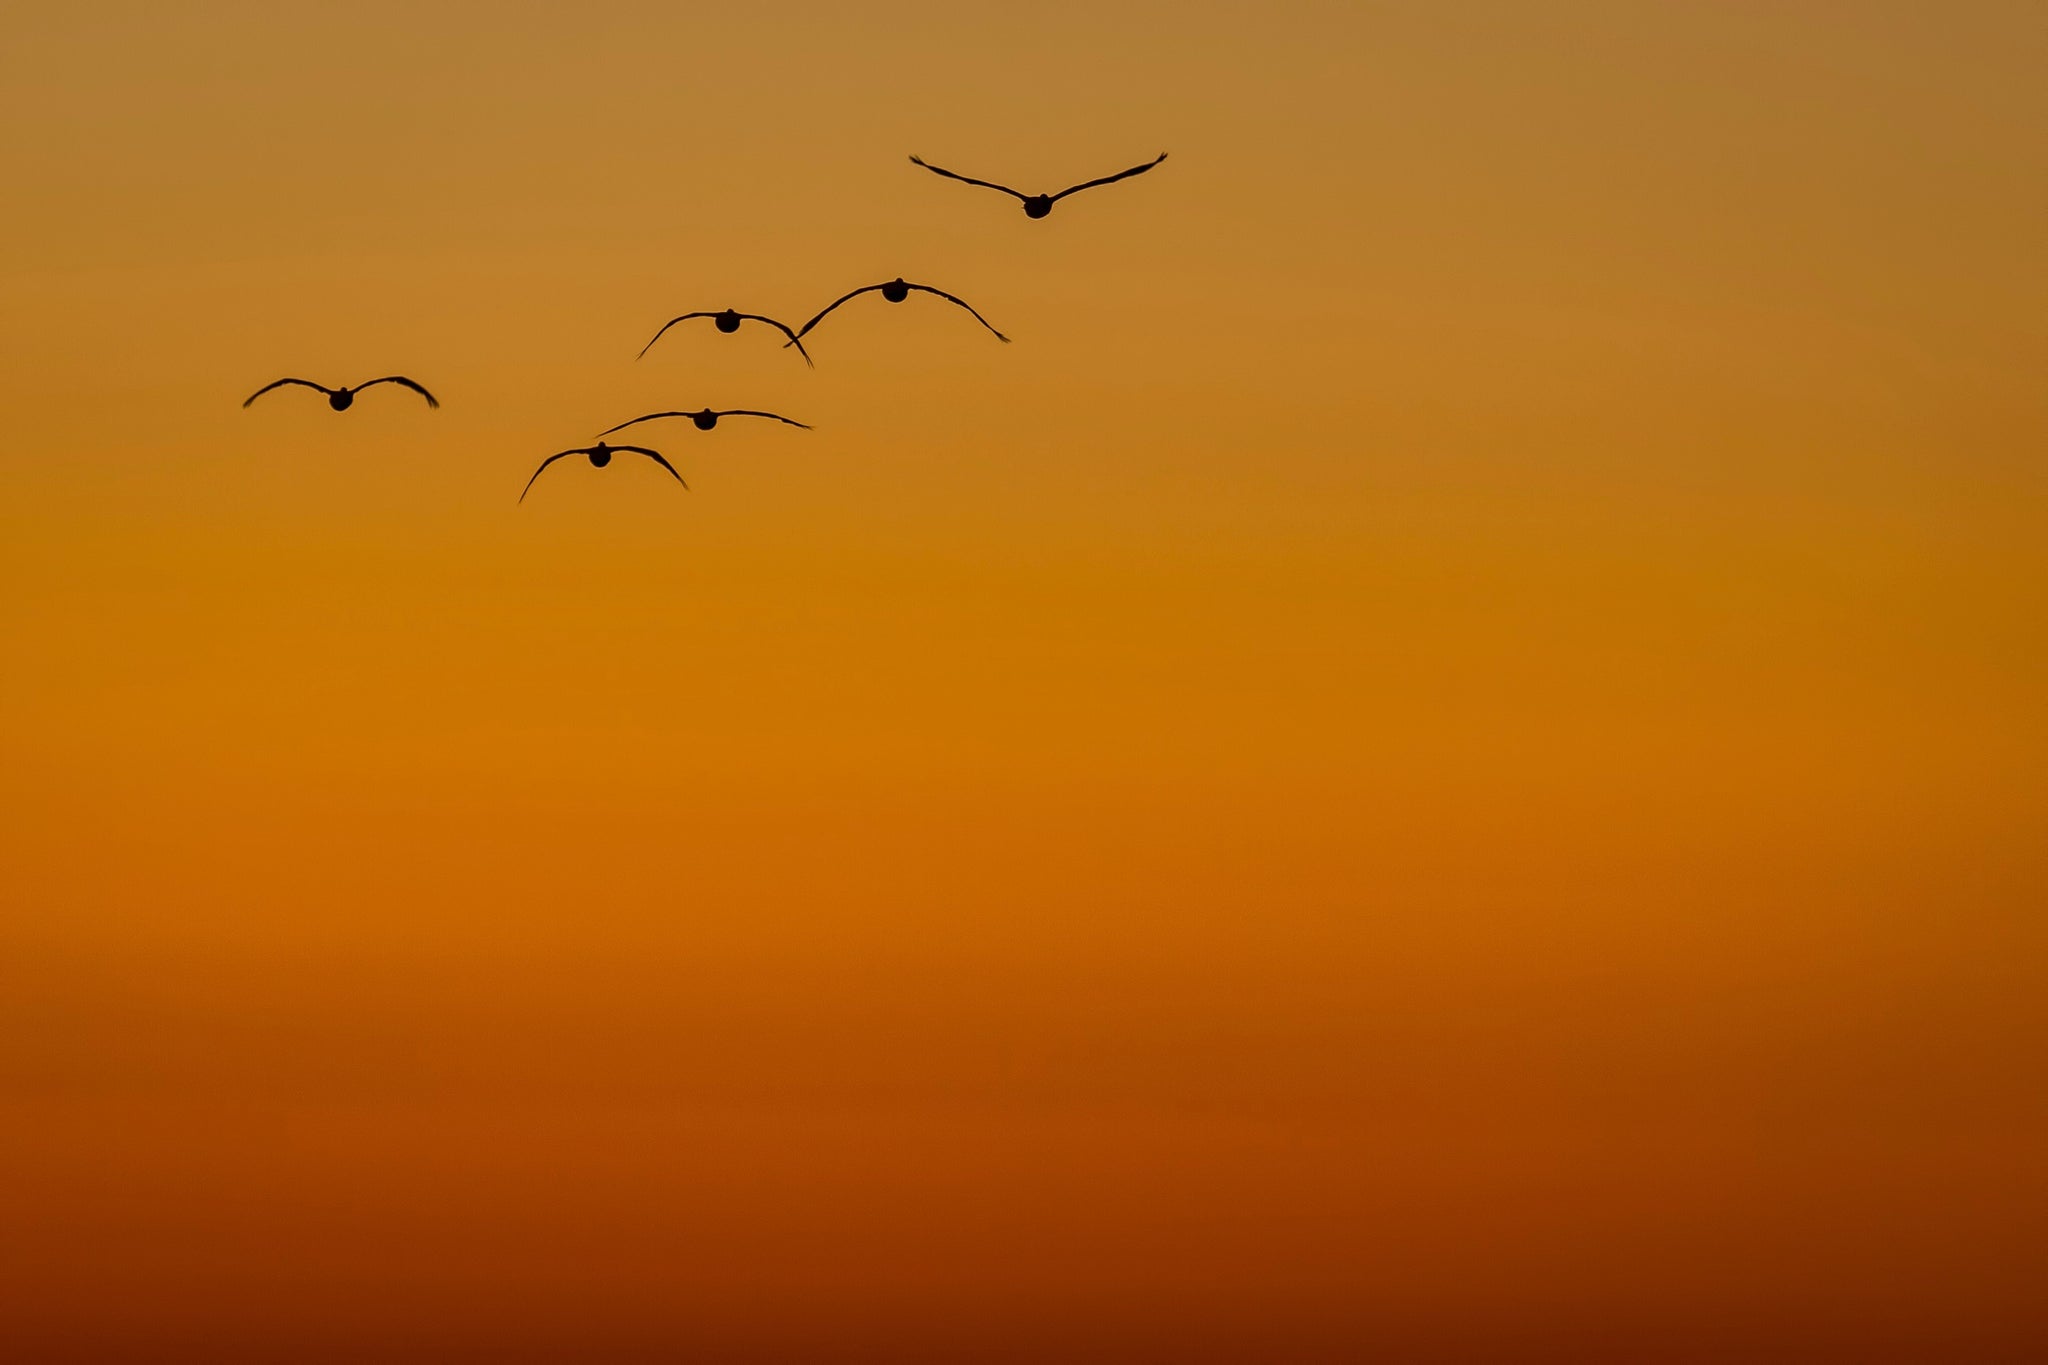 Brown pelicans fly off into the sunset.